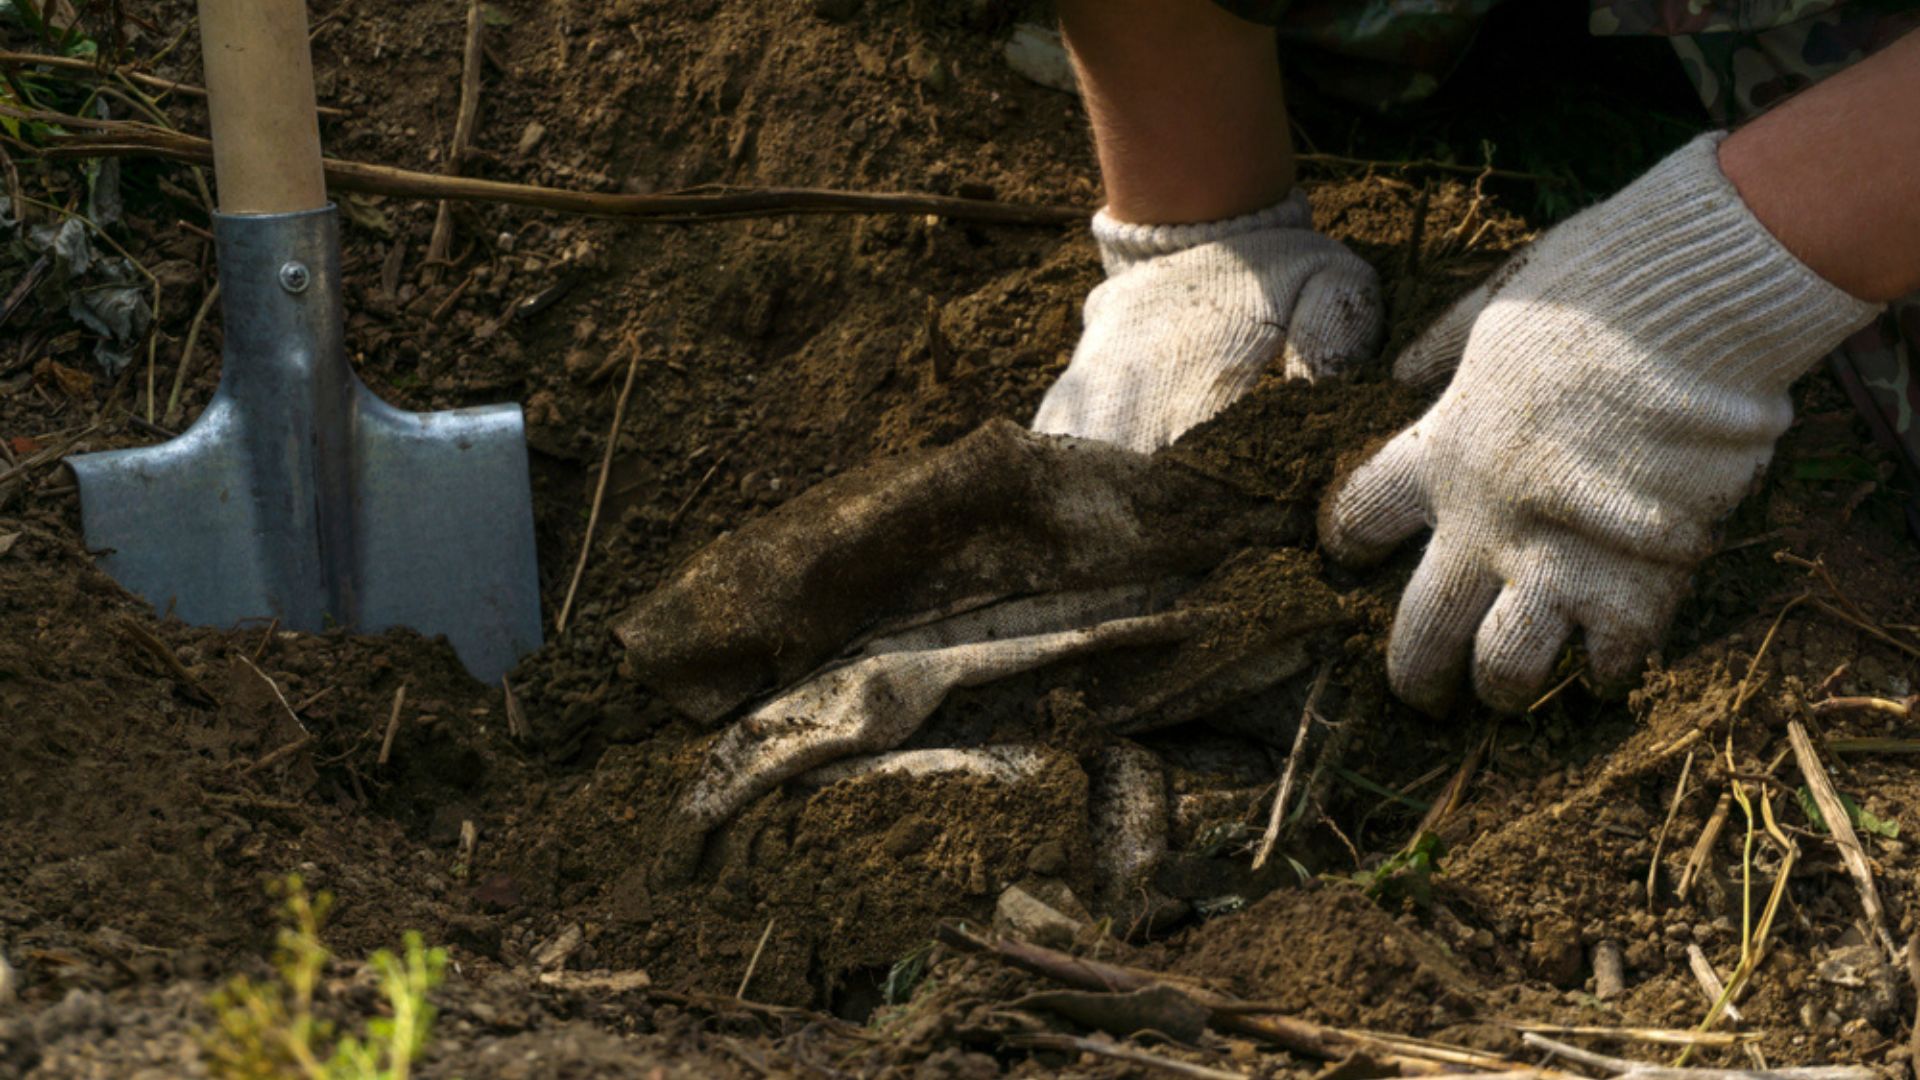 Is Your Soil Supercharged? Take The Underwear Test to Find Out